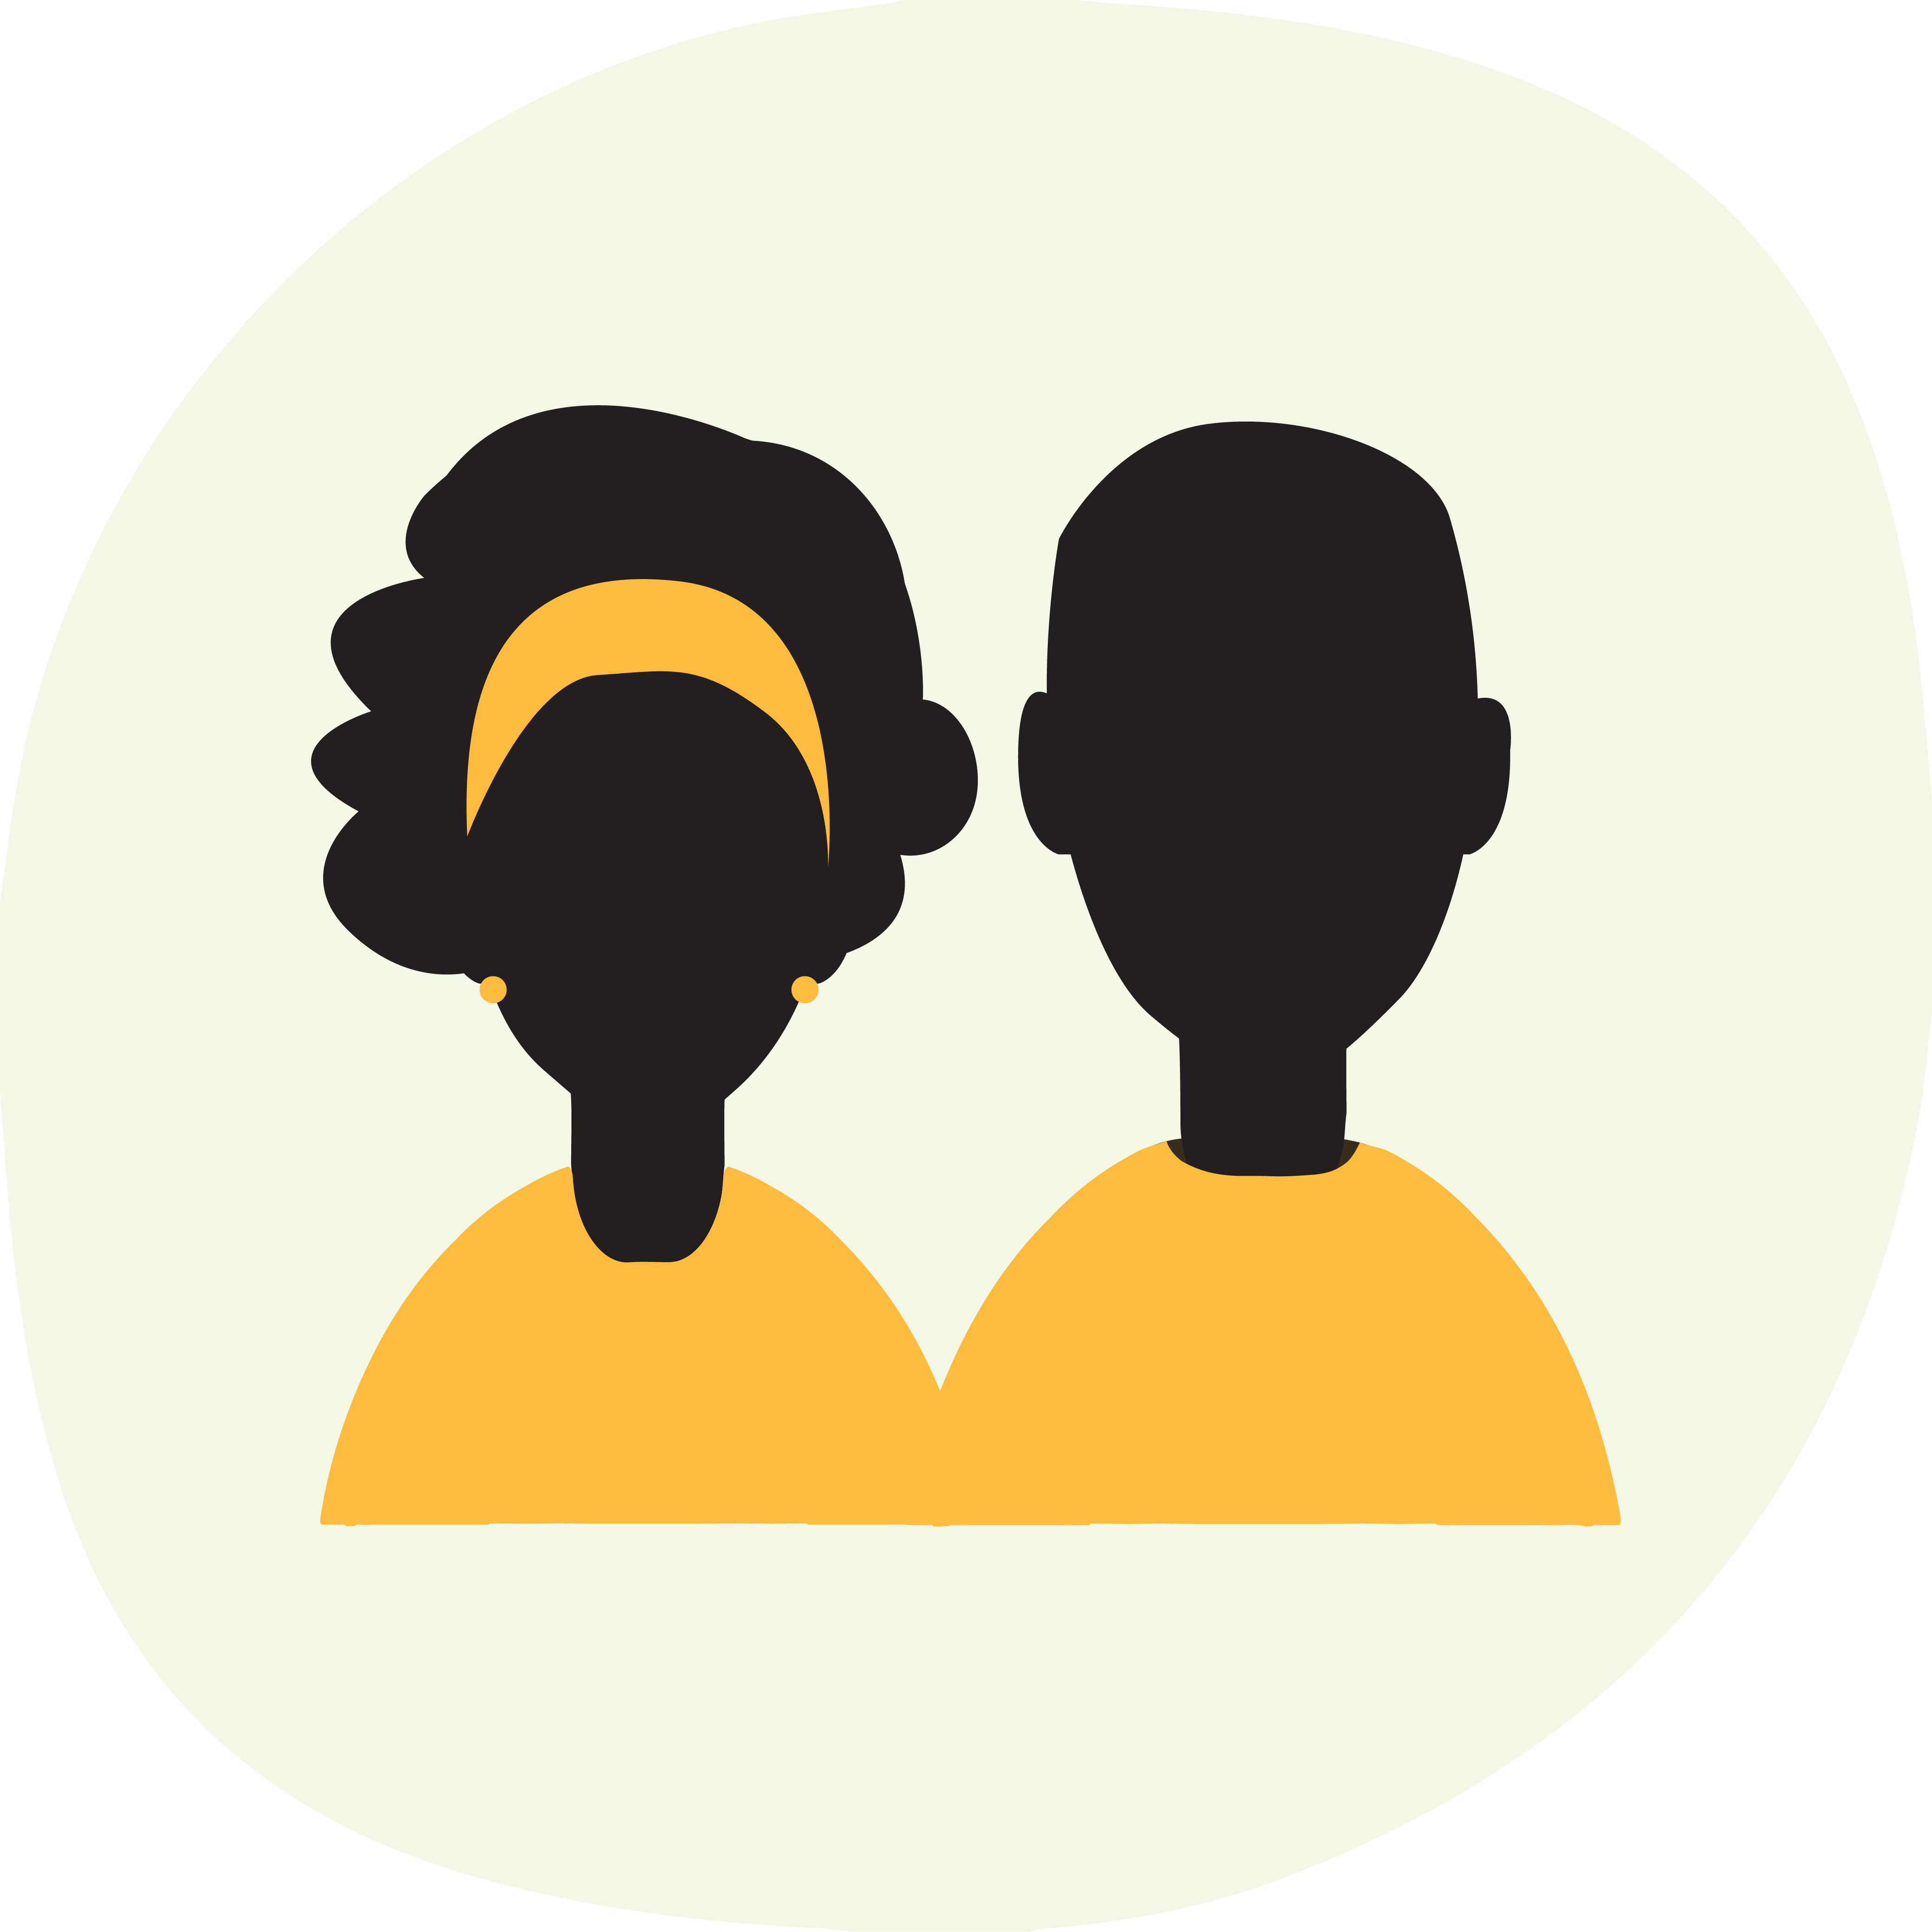 African man and woman icon on a light green background.